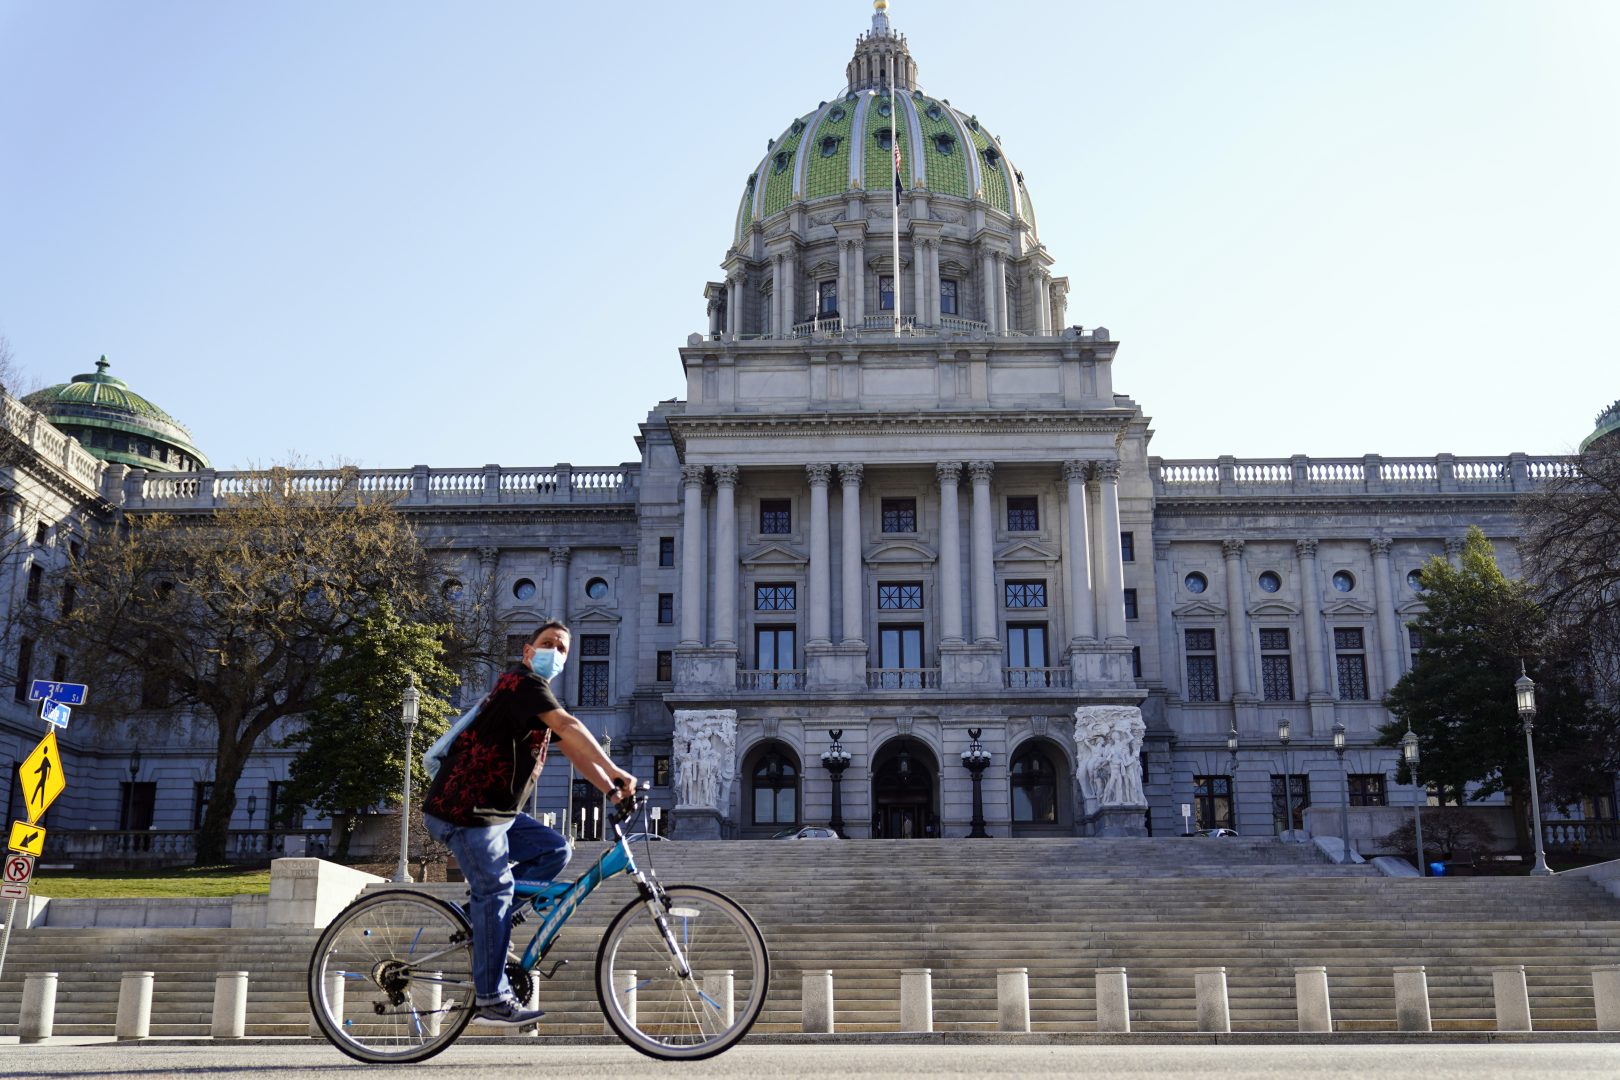 FILE - A cyclist rides past the Pennsylvania Capitol in Harrisburg, Pa., on March 22, 2021. Republican state lawmakers may soon decide which among the scores of potential amendments to the Pennsylvania Constitution will have any shot of making it to a voter referendum — a tactic that can get politically divisive policies around Democratic Gov. Tom Wolf's much-used veto pen. The comparatively large number of proposals pending in the General Assembly address topics that range from voting rights to abortion and real estate taxes. (AP Photo/Matt Rourke, File)